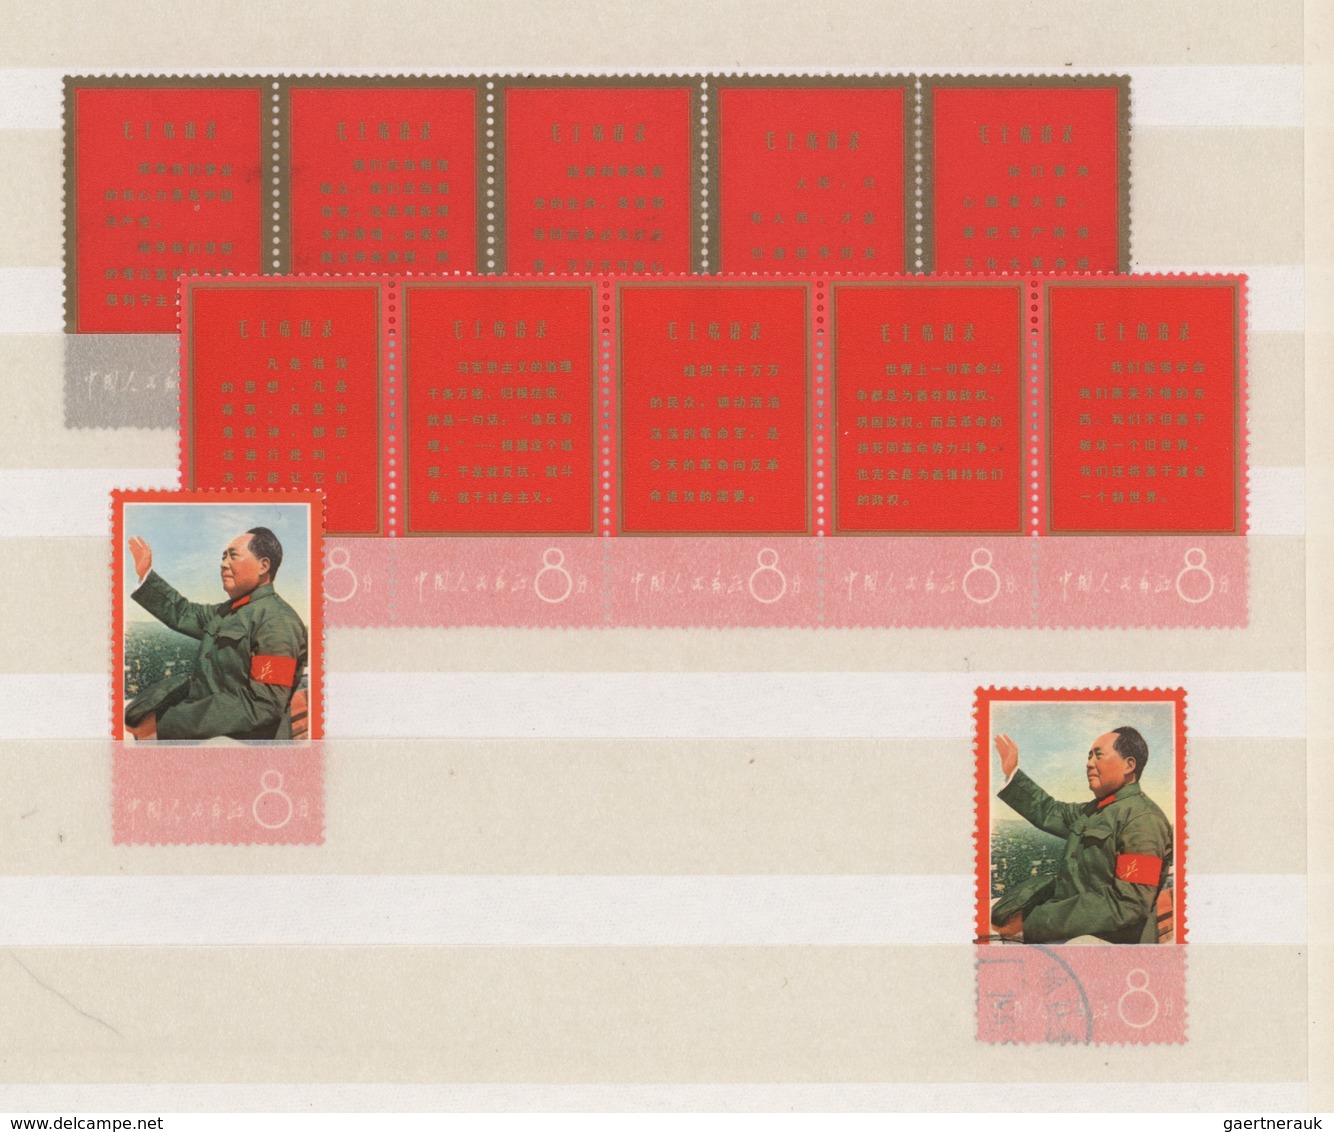 China - Volksrepublik: 1949/98, highly comprehensive, and largely complete collection of the PRC, in